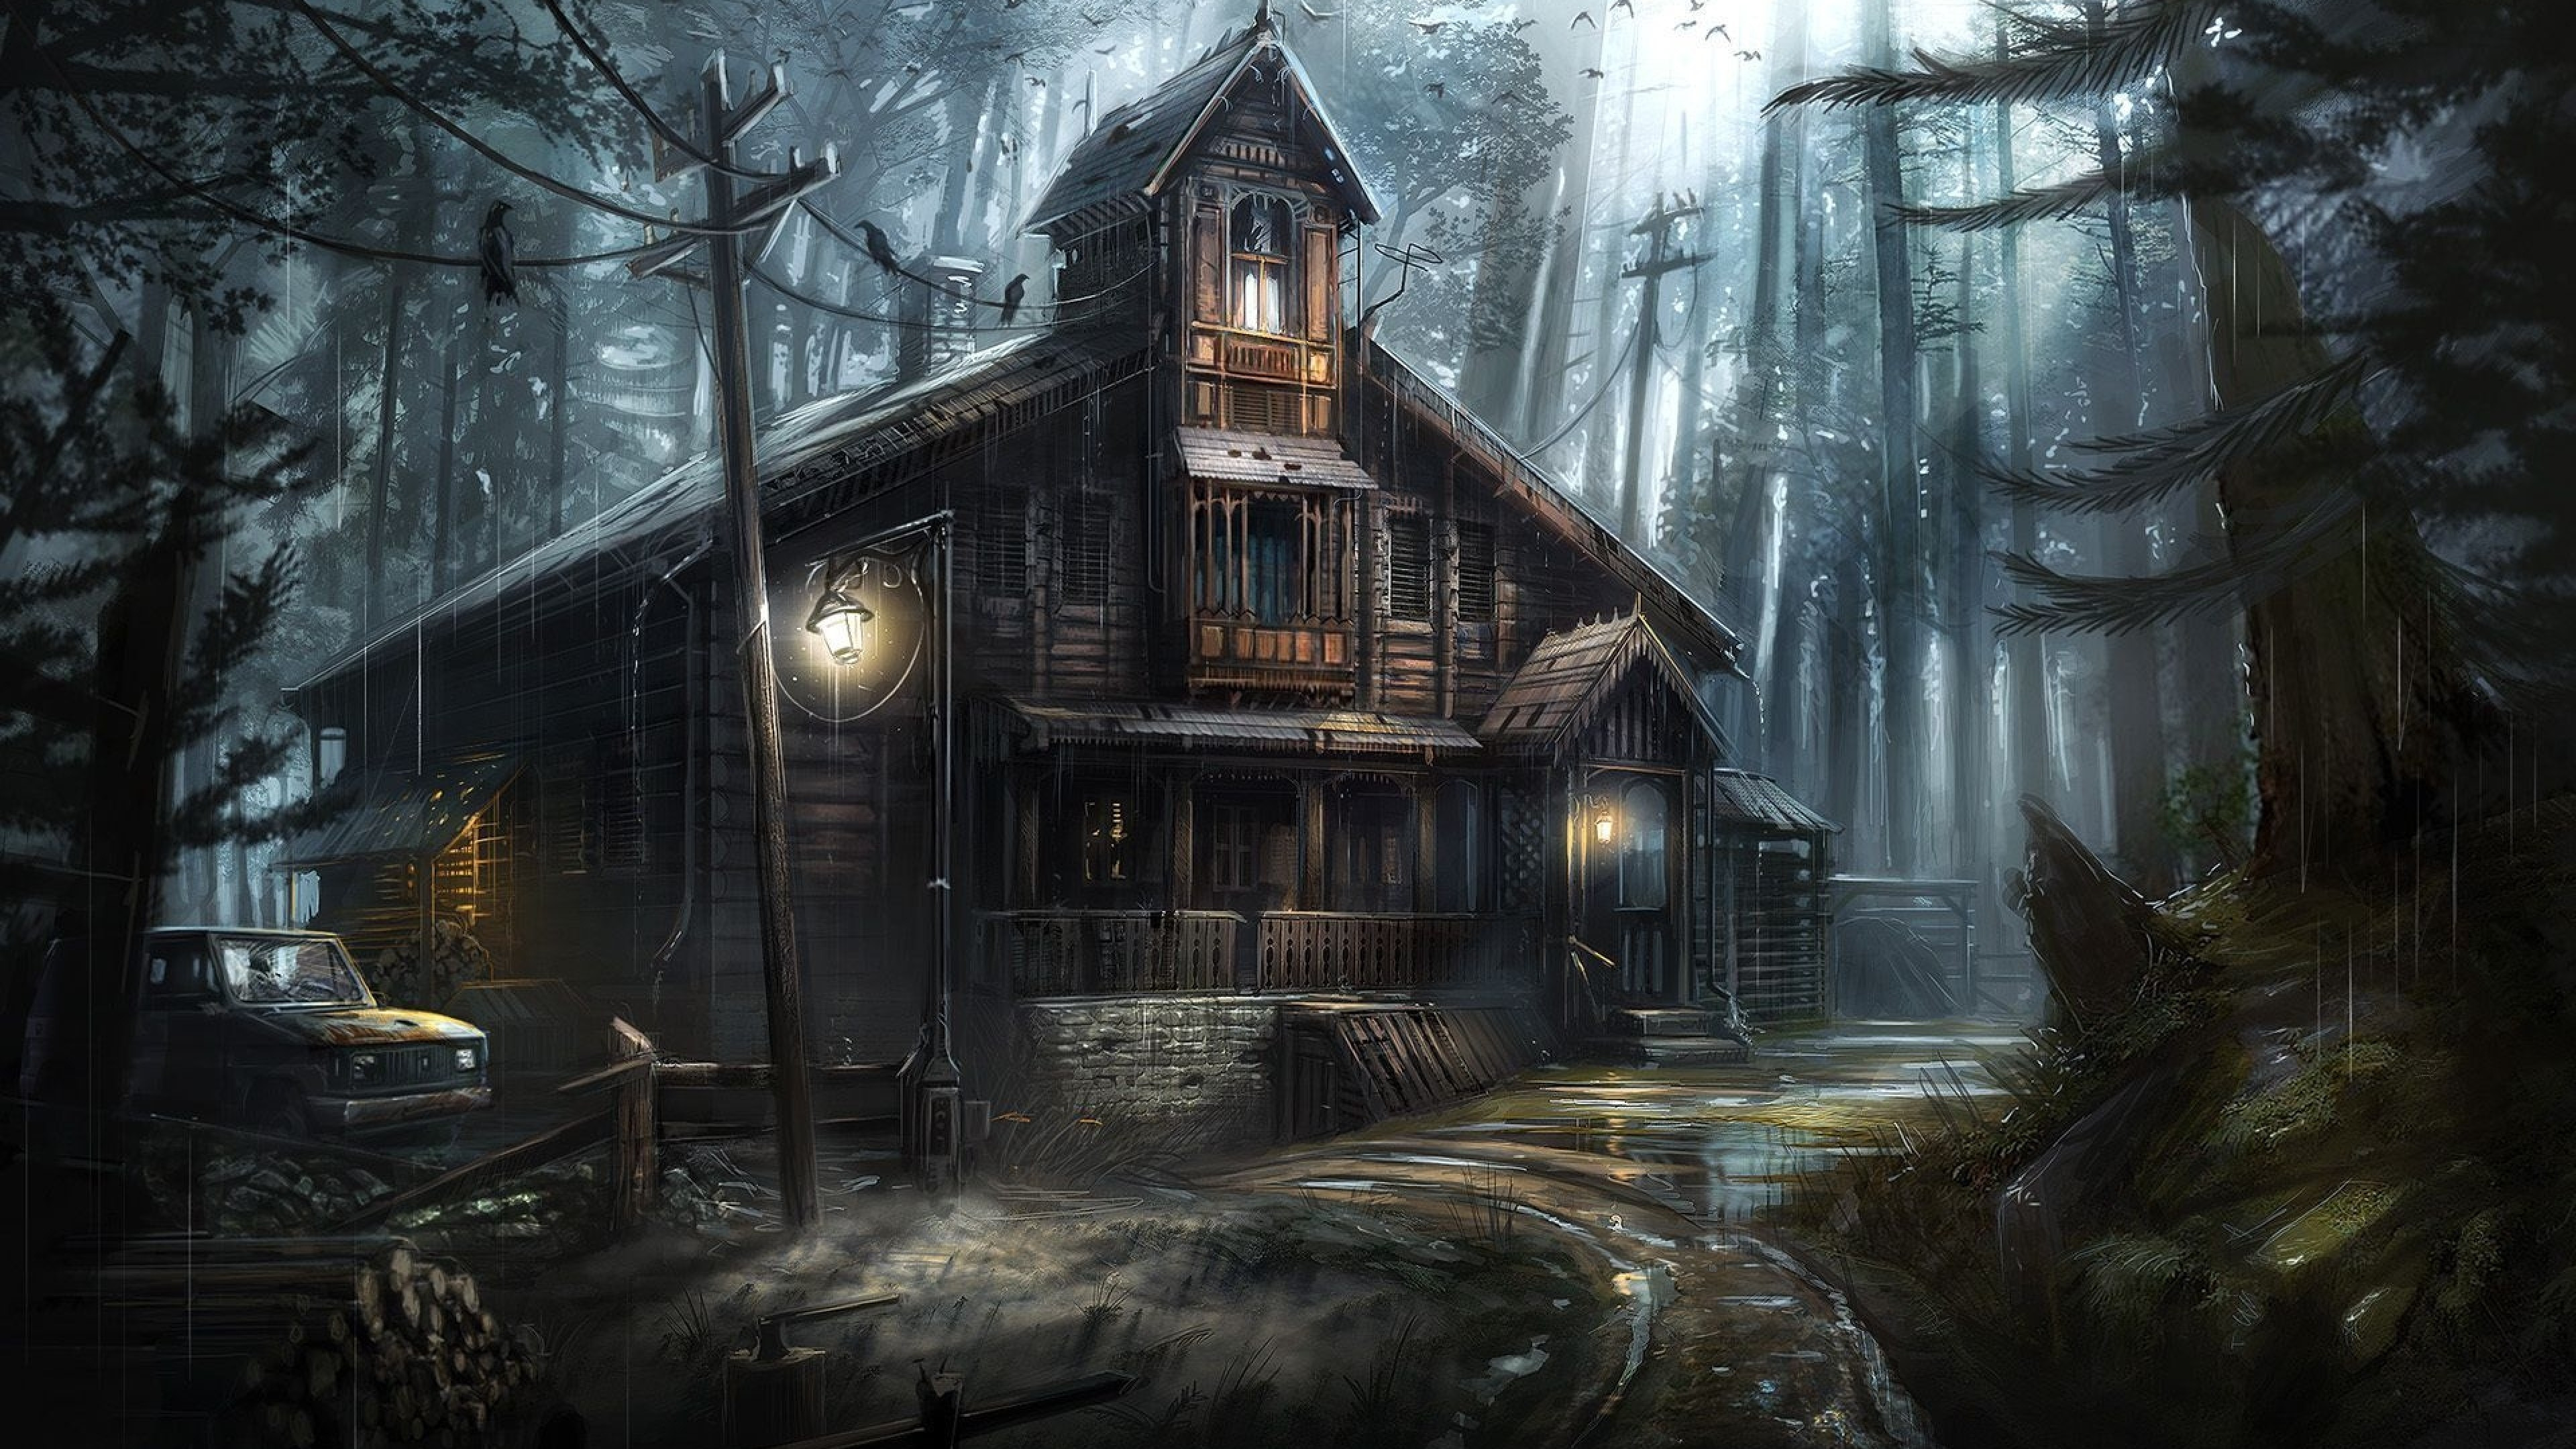 Download 3840x2160 Dark Forest, Crows, Haunted House, Horror Wallpapers for UHD TV